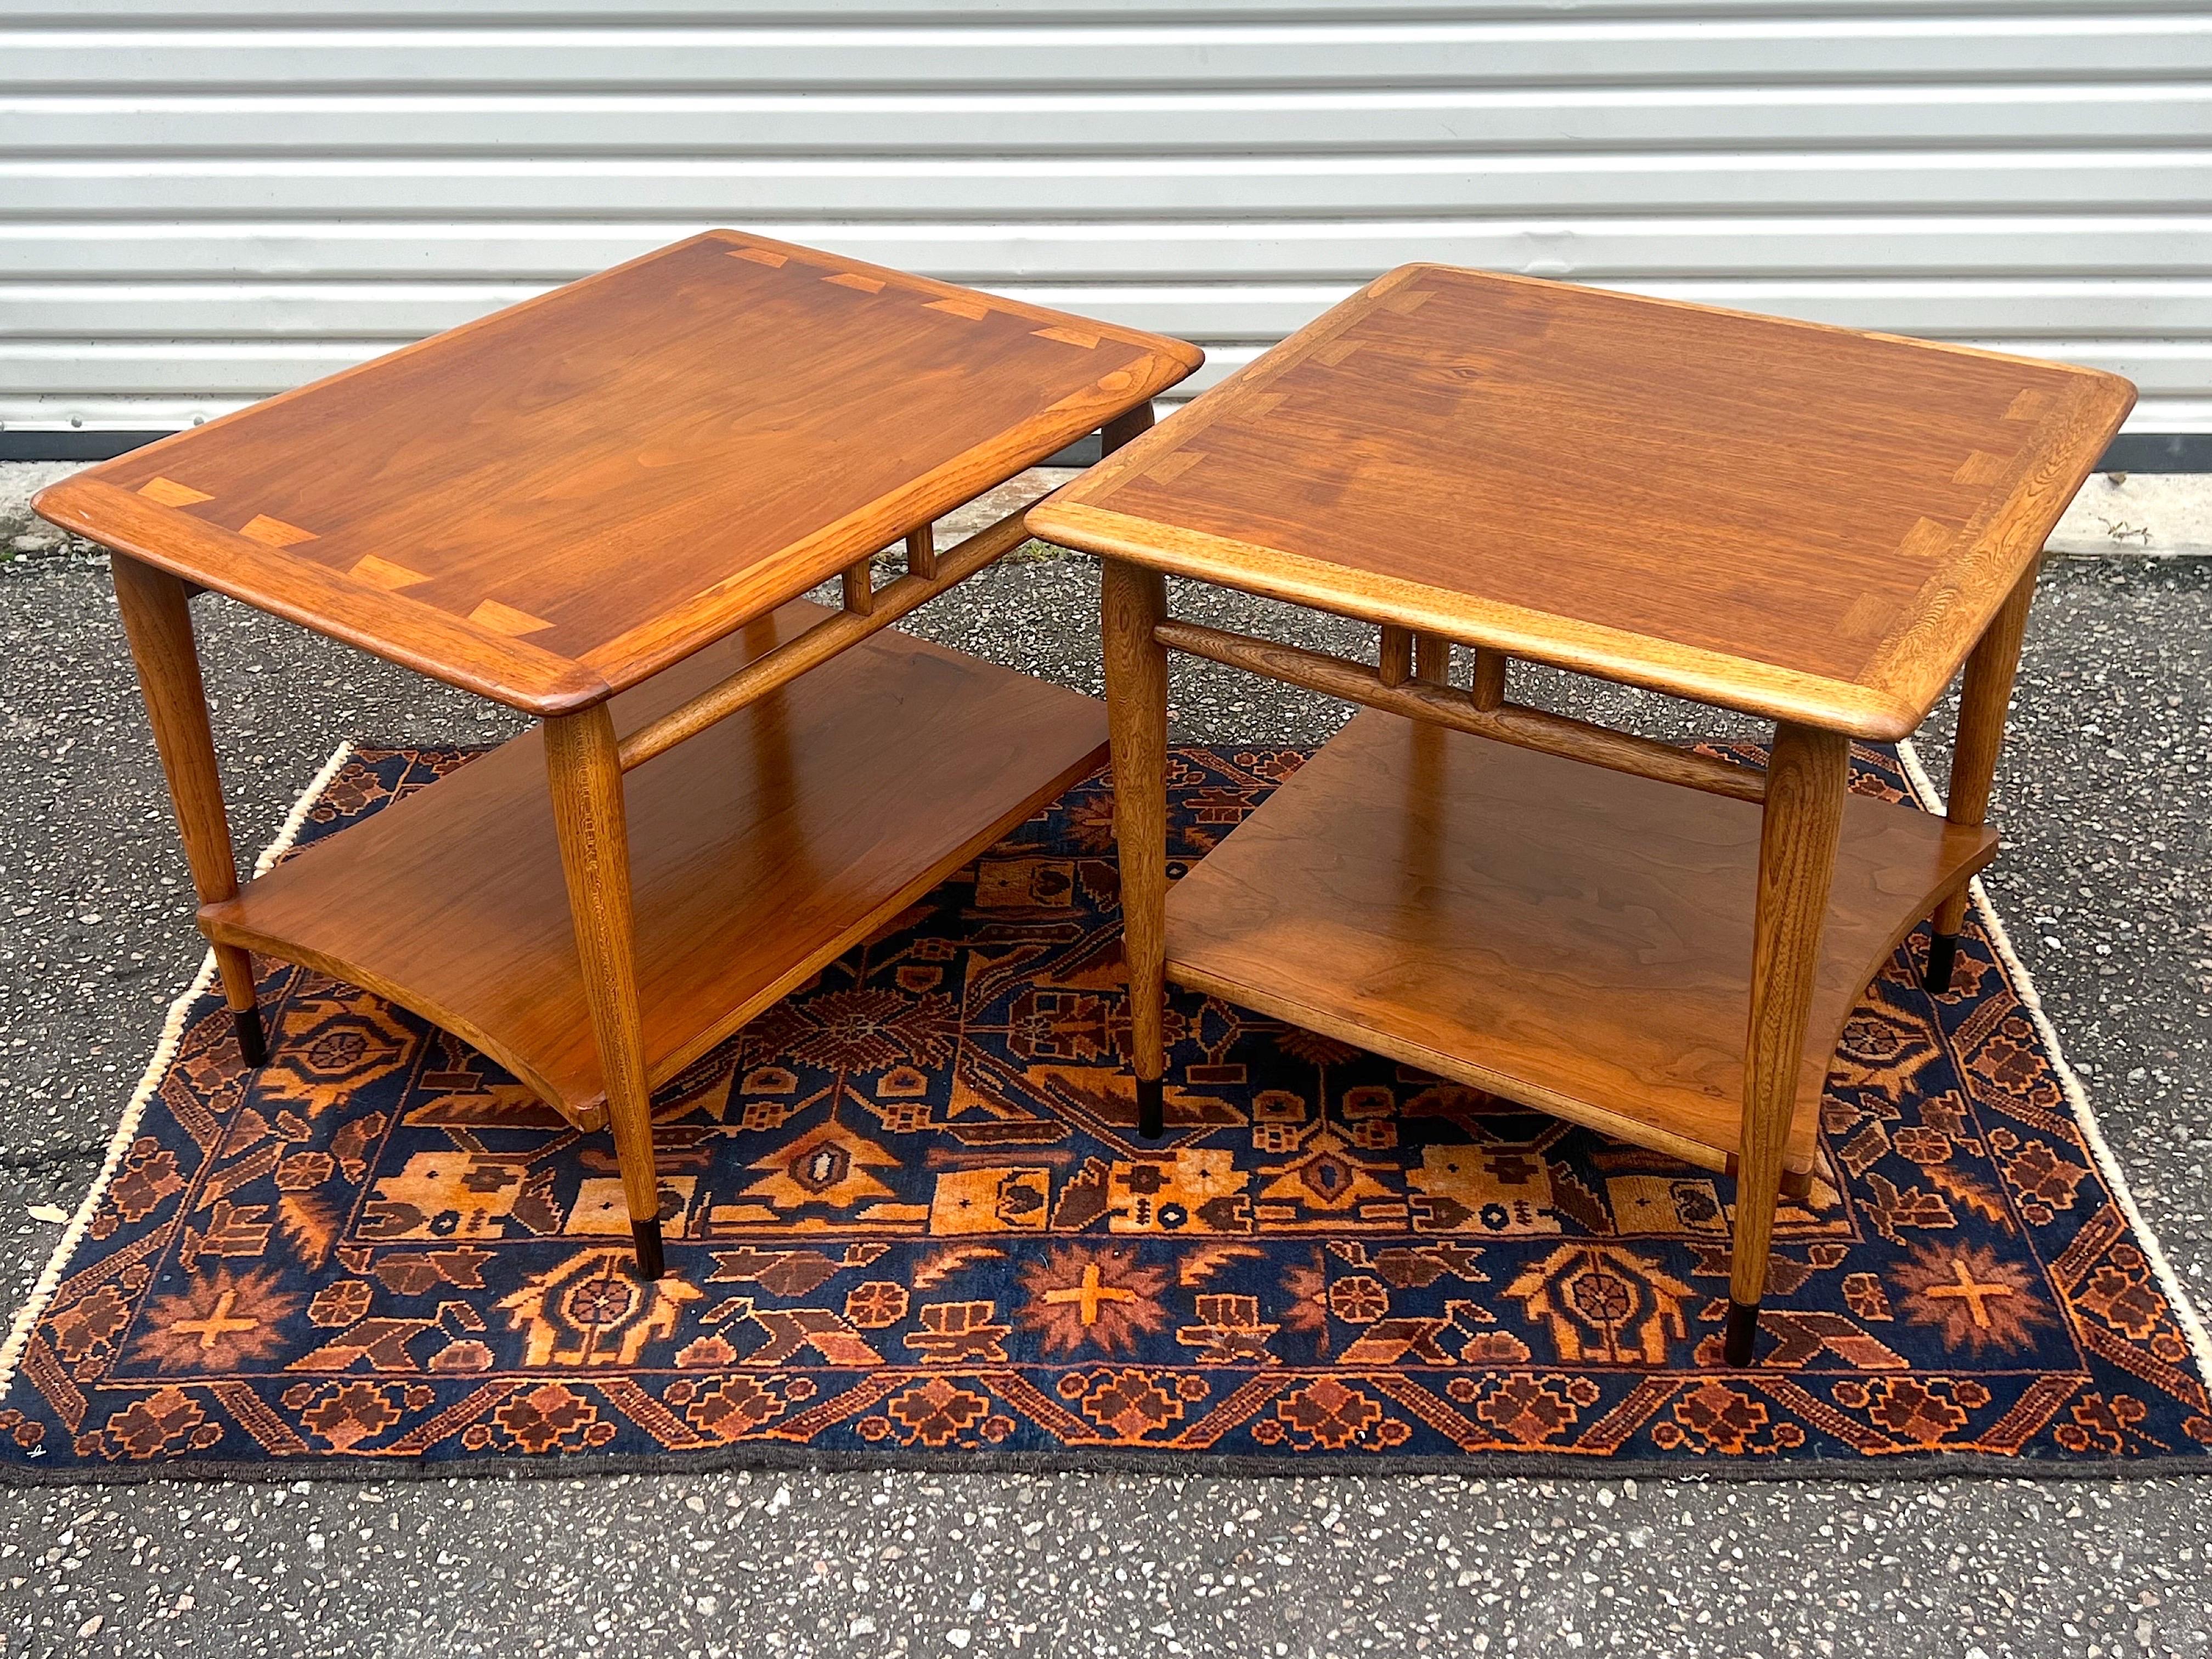 Iconic Mid-Century Modern end tables from the Lane “Acclaim” collection. The tables feature the signature large dovetail tops and curved lower shelf and black painted tips on the legs. 

The square table measures: 20.5” tall x 23” deep x 22.75